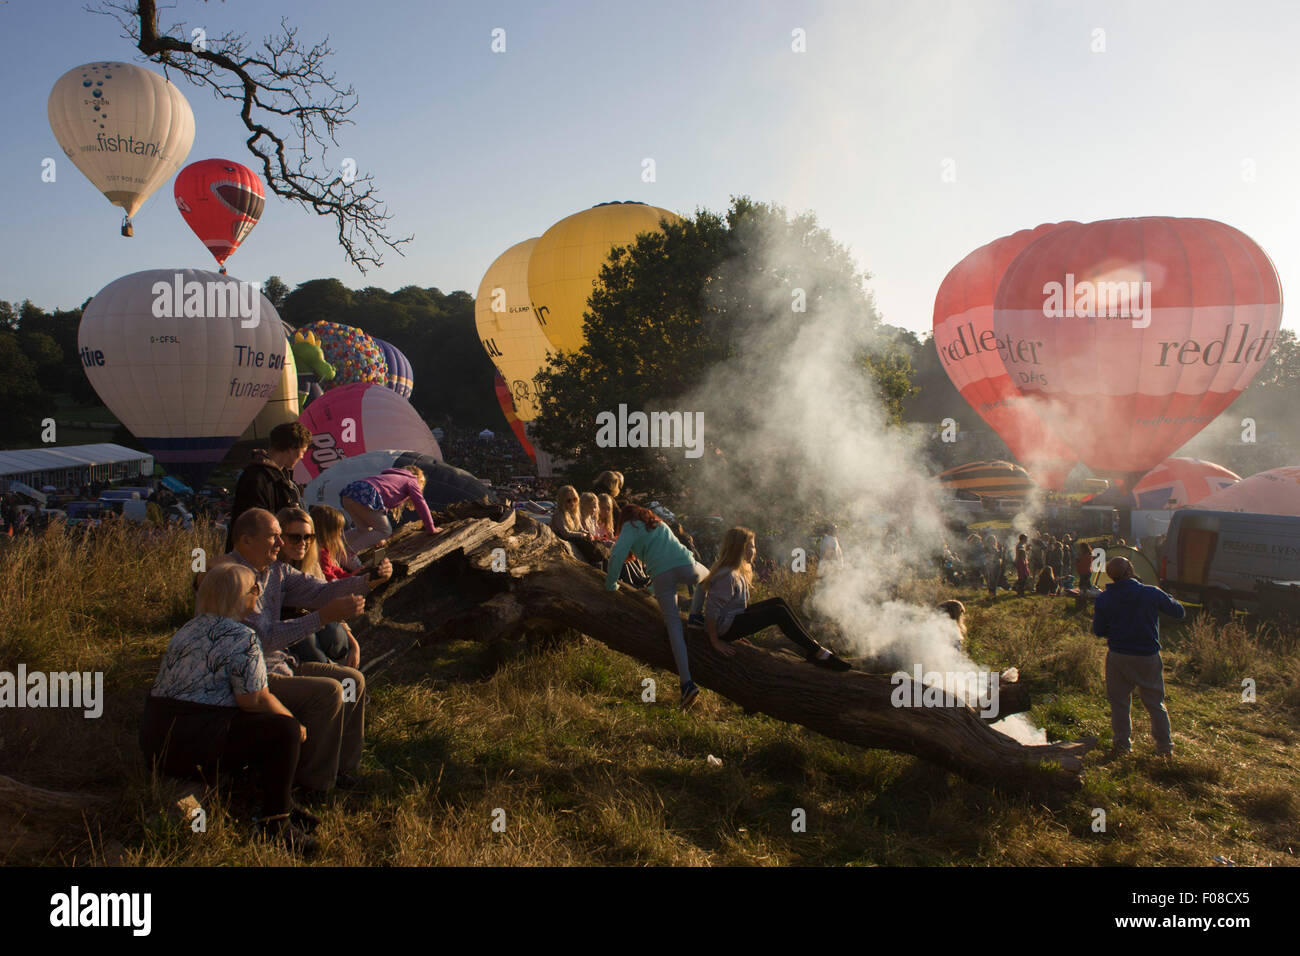 Families watch the mass lift-off by balloons at Bristols annual fiesta at Ashton Court, UK. Stock Photo